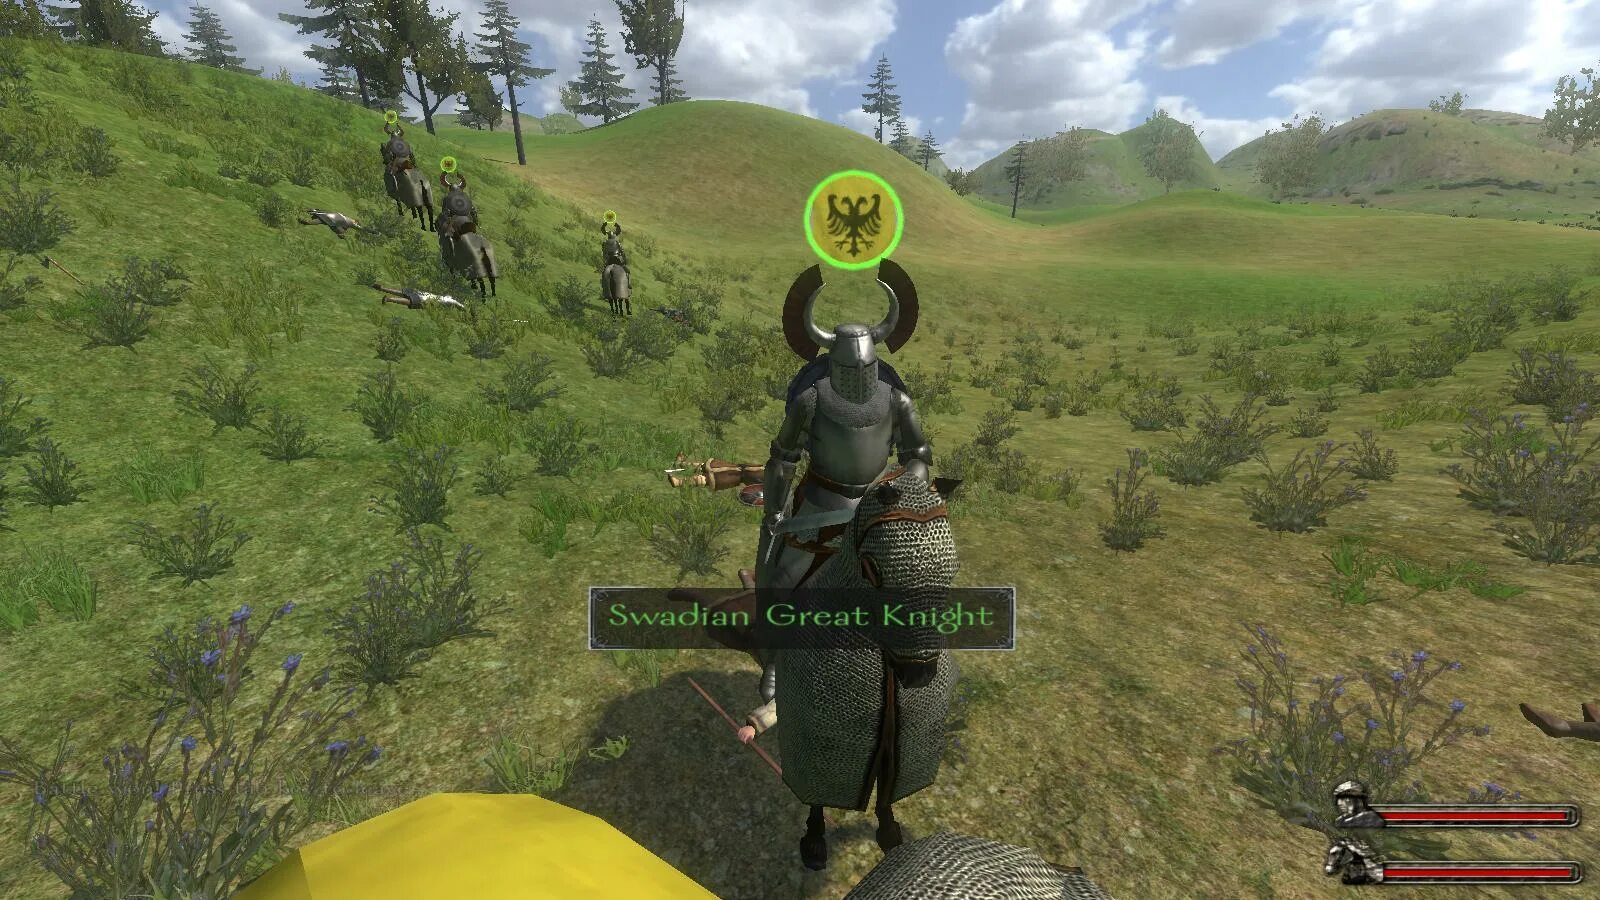 Правен Mount and Blade Warband. Mount and Blade Swadian Knight. Рыцарь анаконды Mount and Blade. Игры похожие на Mount and Blade.